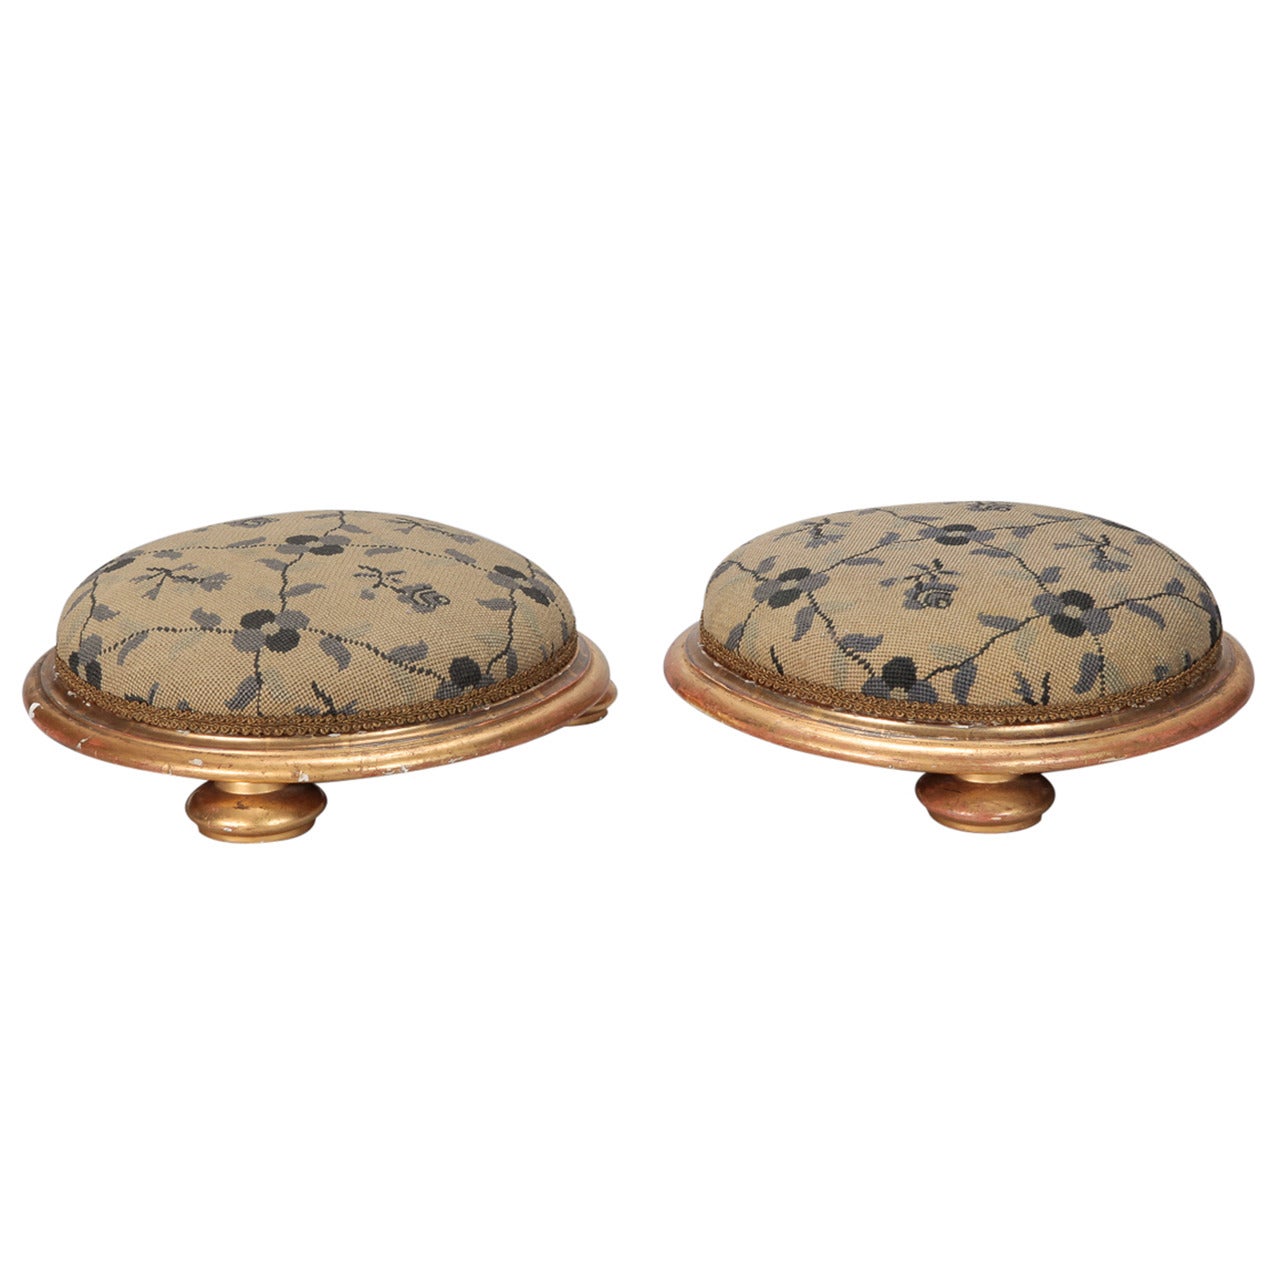 Pair of Small 19th Century Giltwood Foot Stools with Needlework